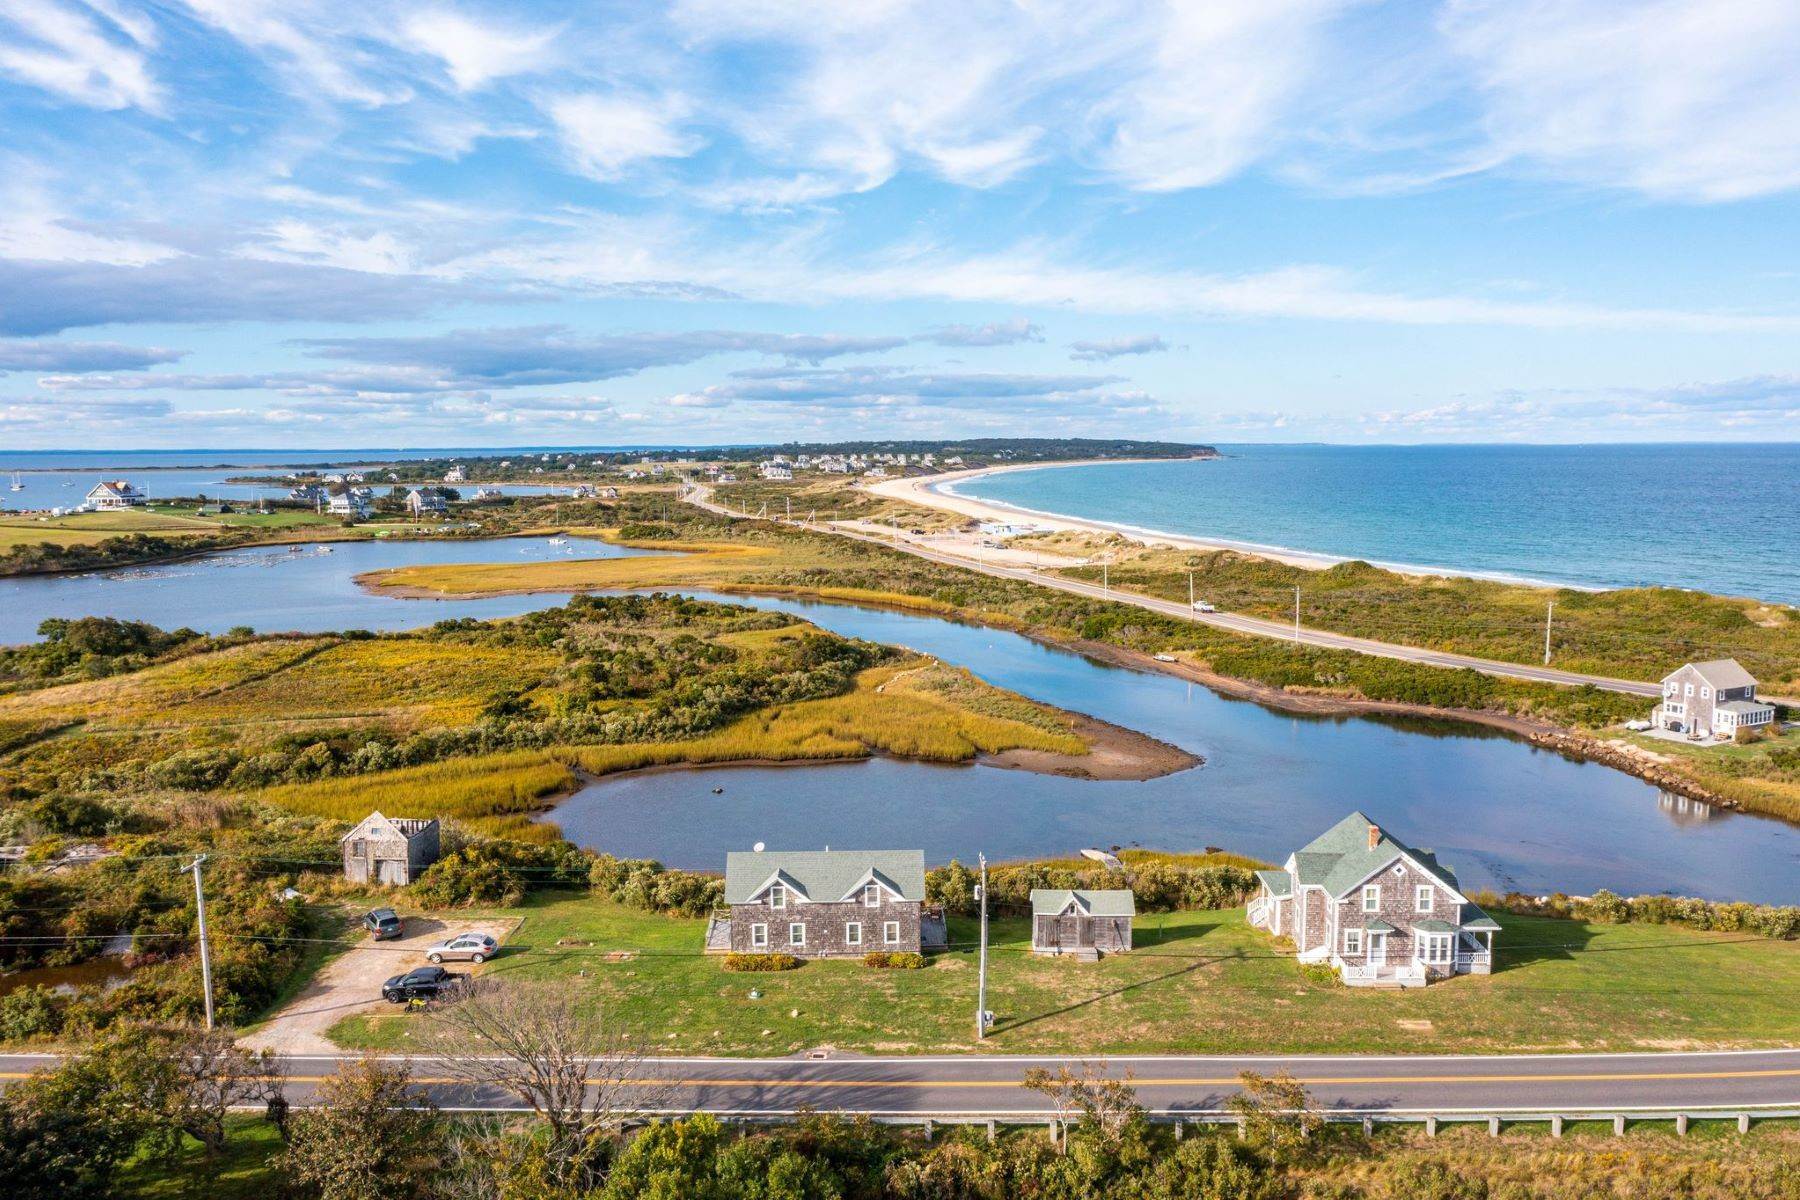 Property for Sale at Multi Building Compound 575 Beach Avenue Block Island, Rhode Island 02807 United States